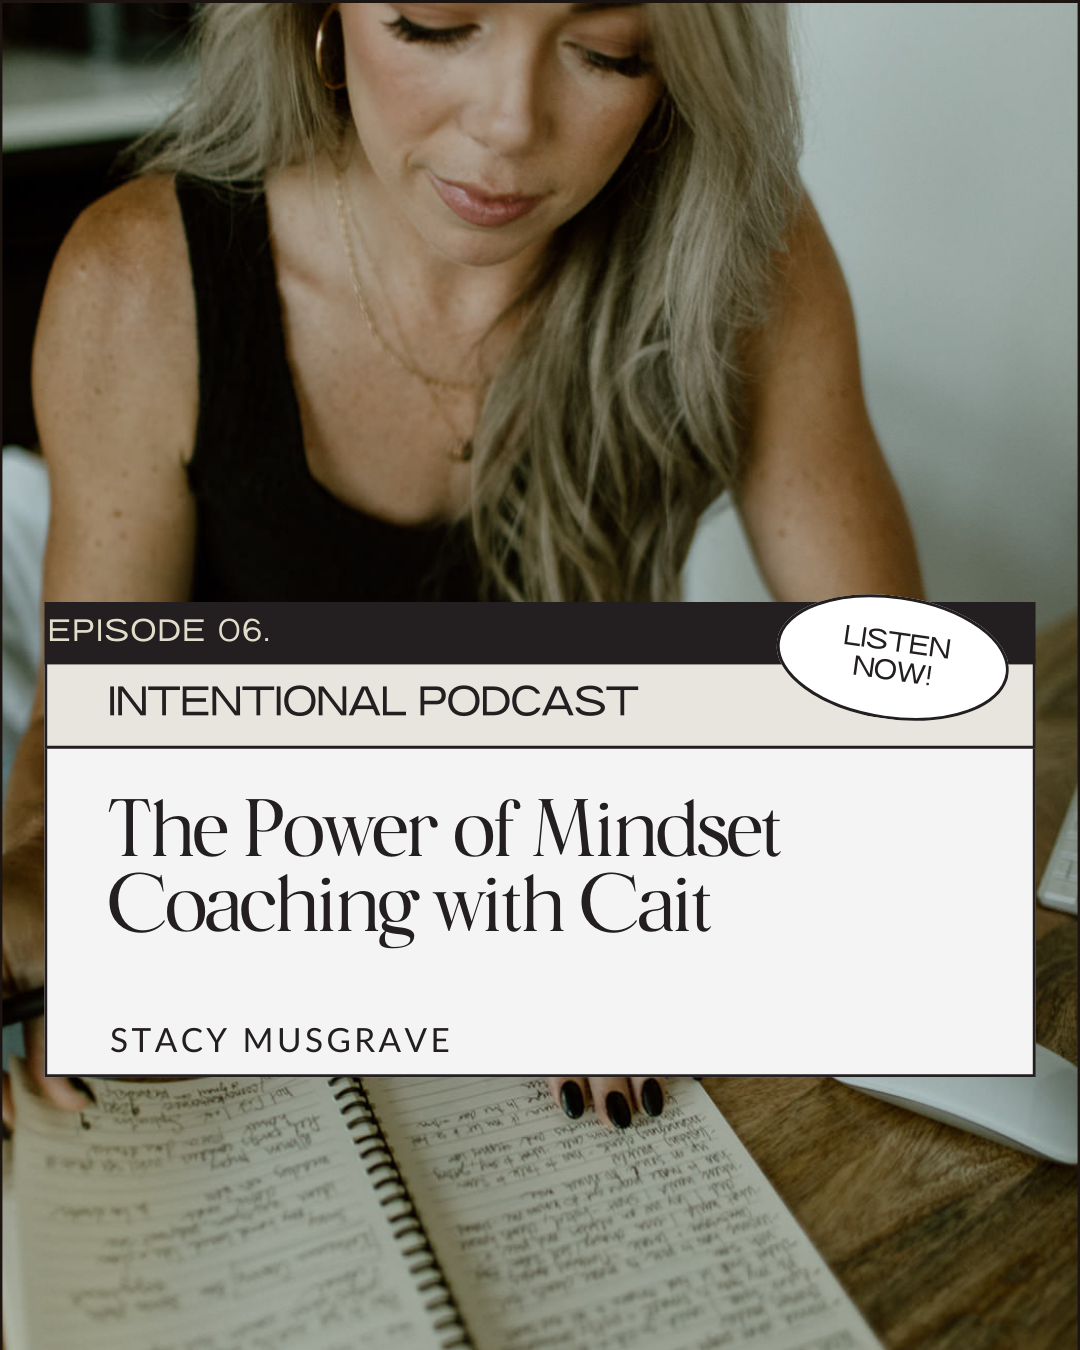 The Power of Mindset Coaching with Cait